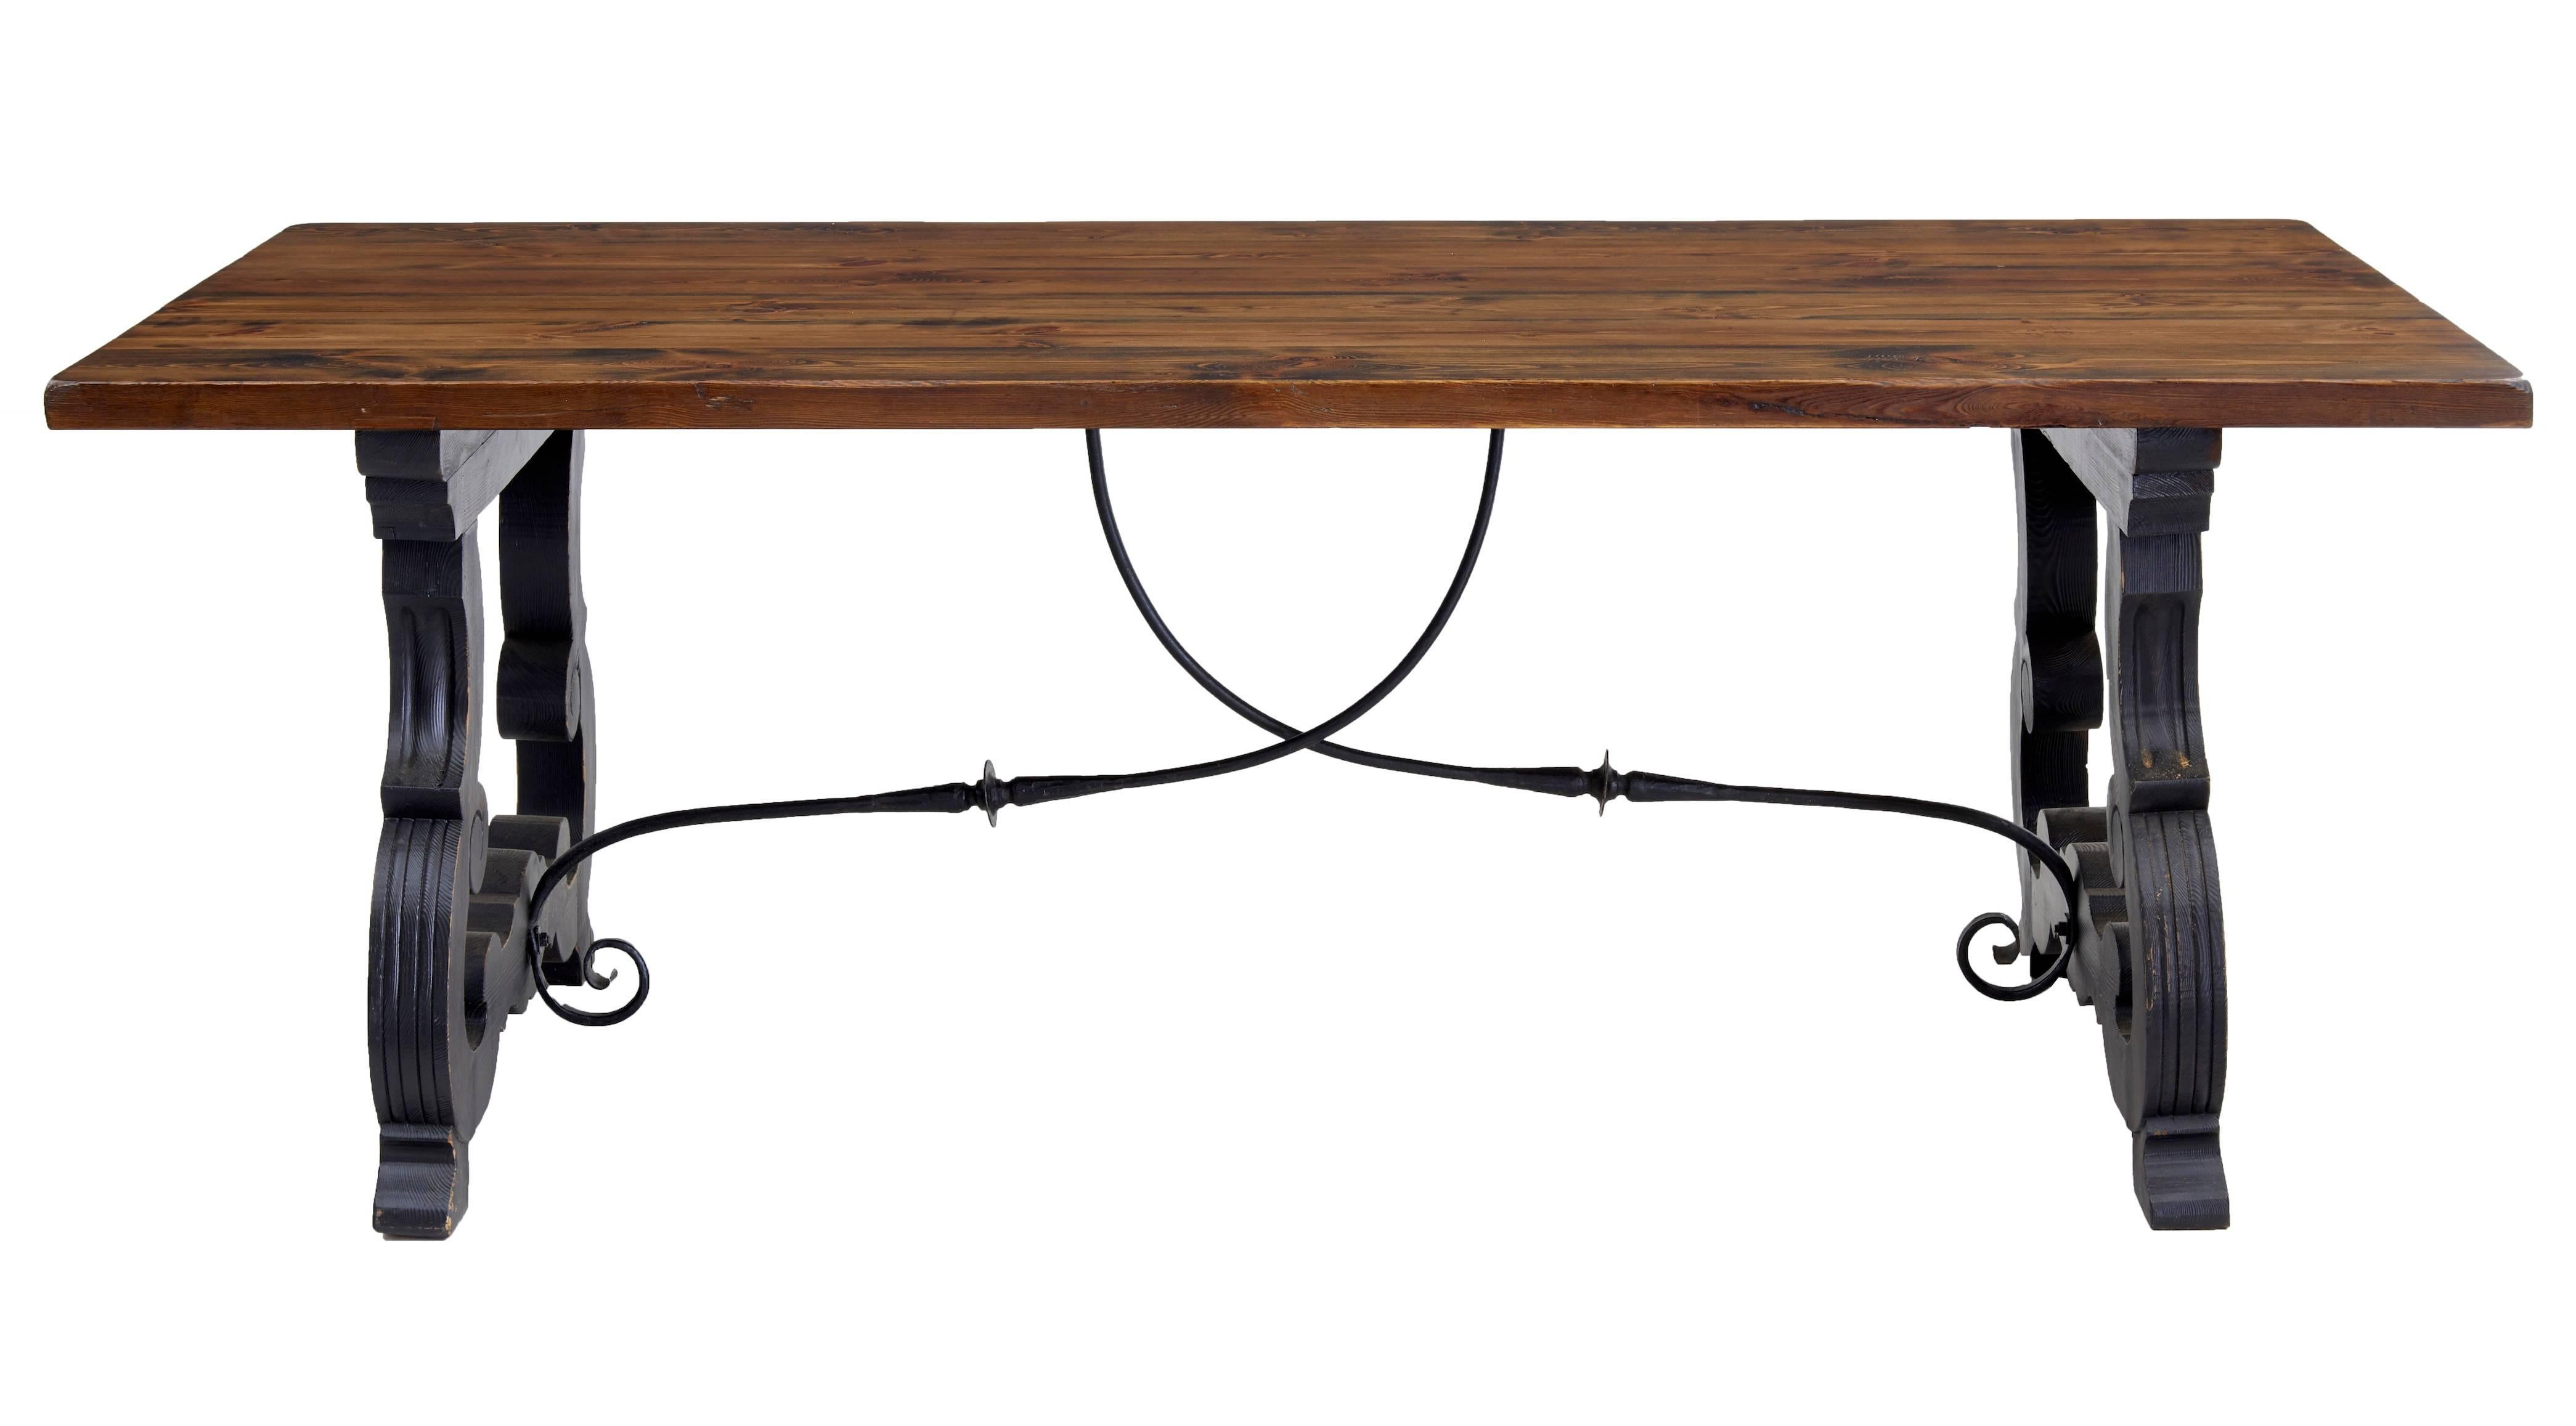 1960s refectory dining table made in the Spanish taste.
Pine stained top, which seats 8-10.
Typical Spanish style trestle legs which and supported by wrought iron crossover stretchers.
1 1/2 inch thick top.

Height: 29 1/2